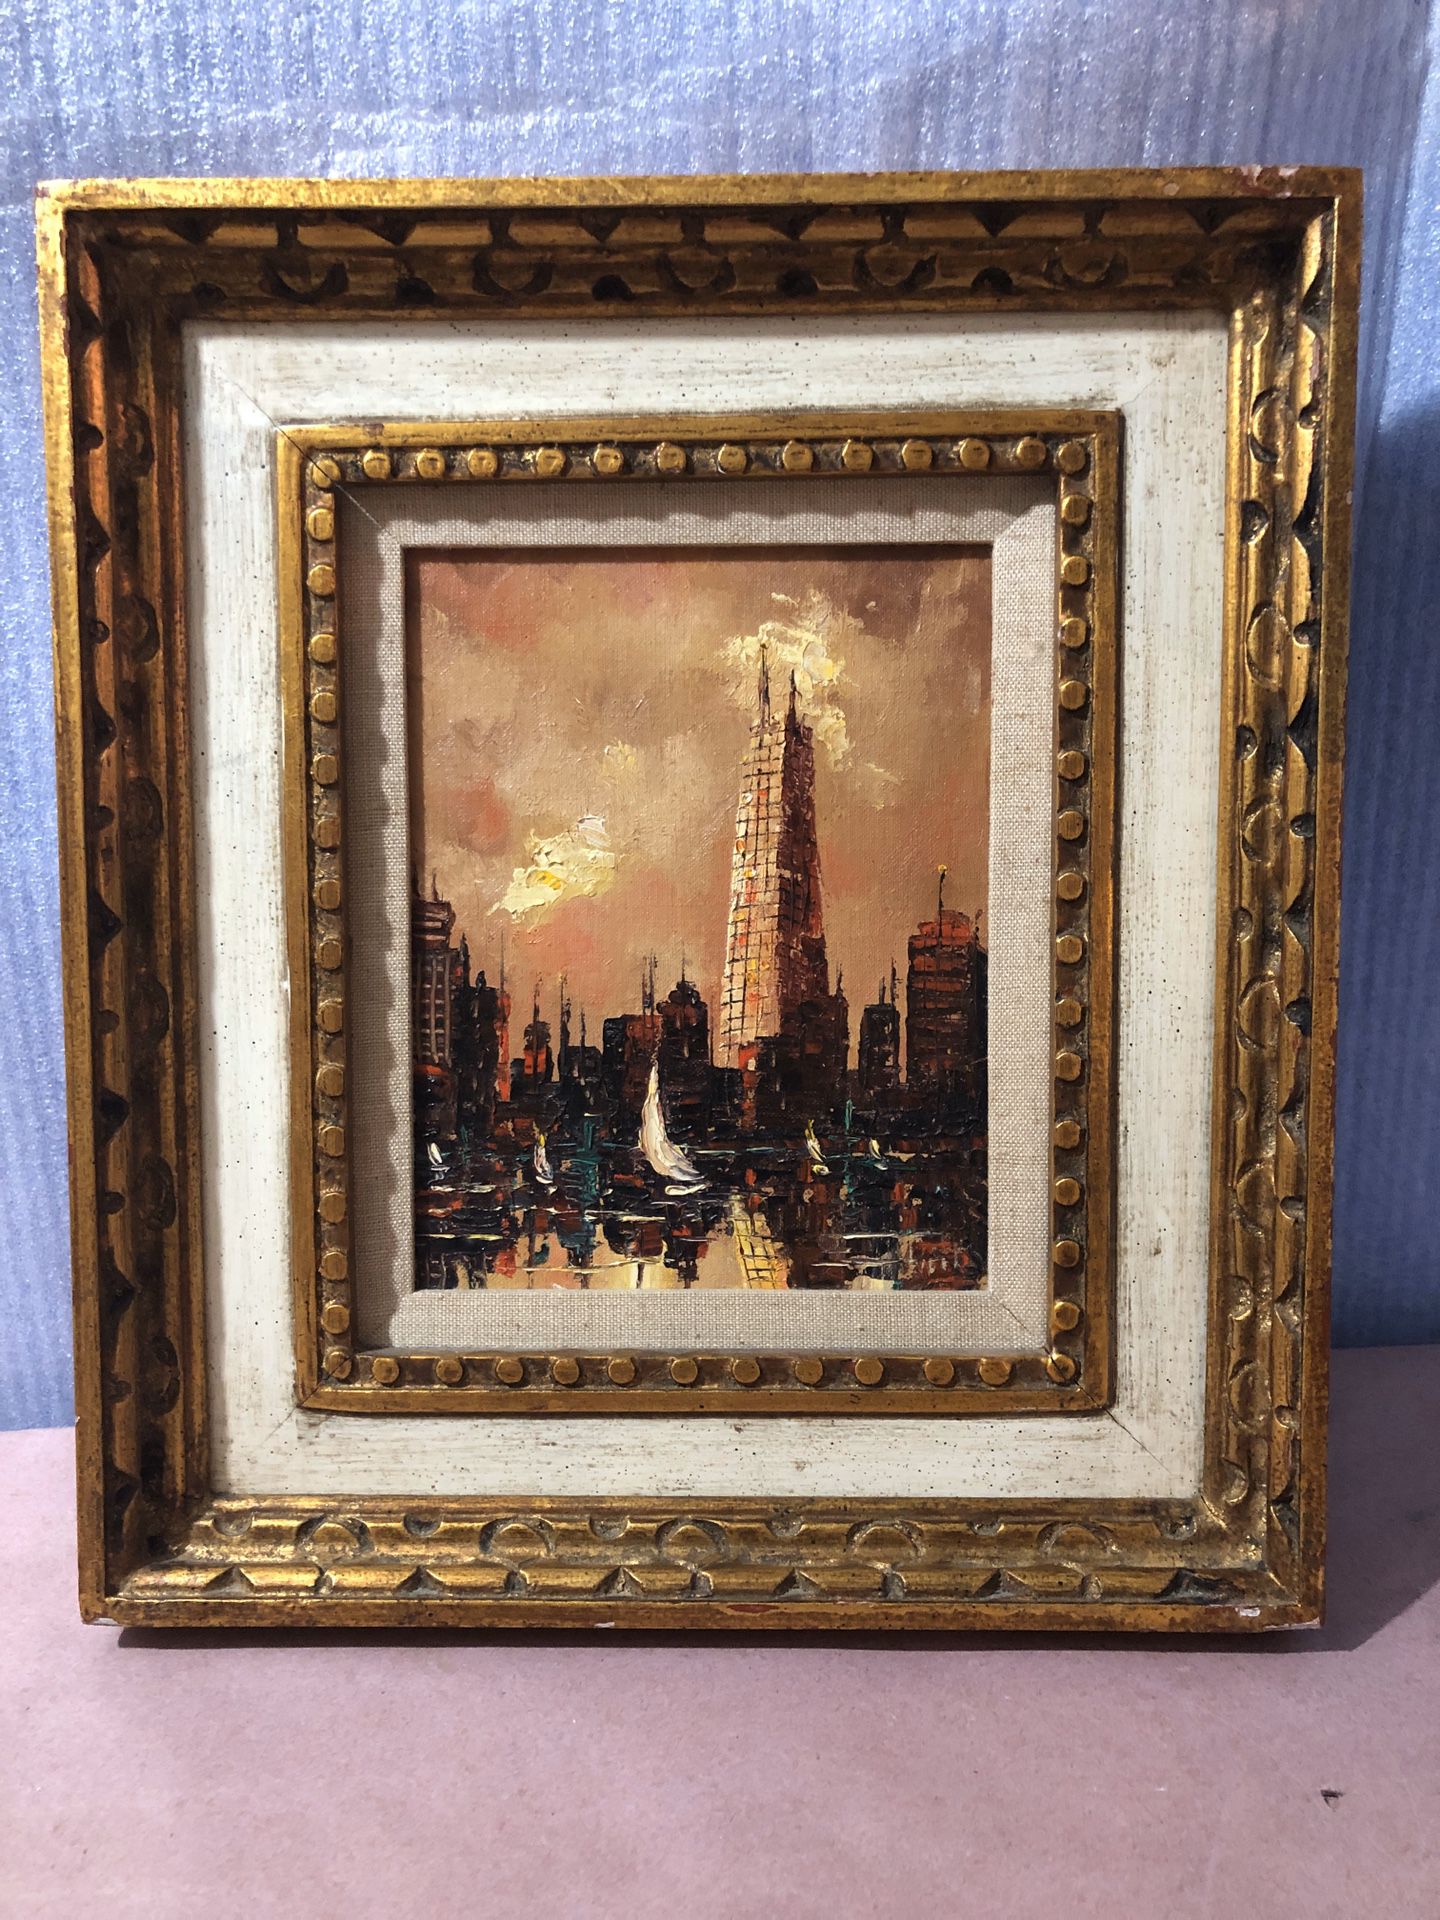 heavy oil painting on canvas panel ,17”x 15”,beautiful golden frame,vintage, no signature,